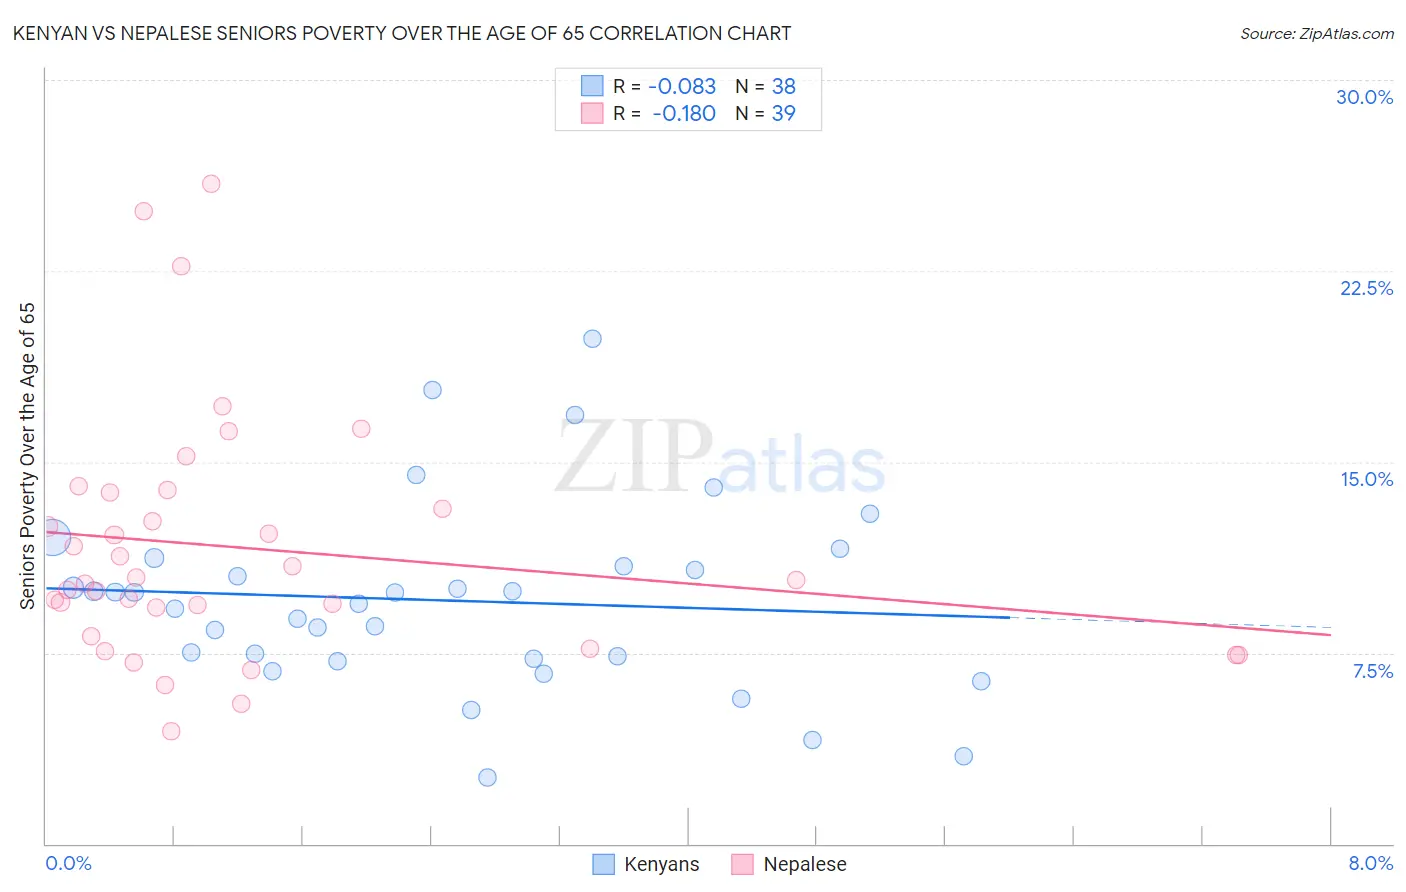 Kenyan vs Nepalese Seniors Poverty Over the Age of 65